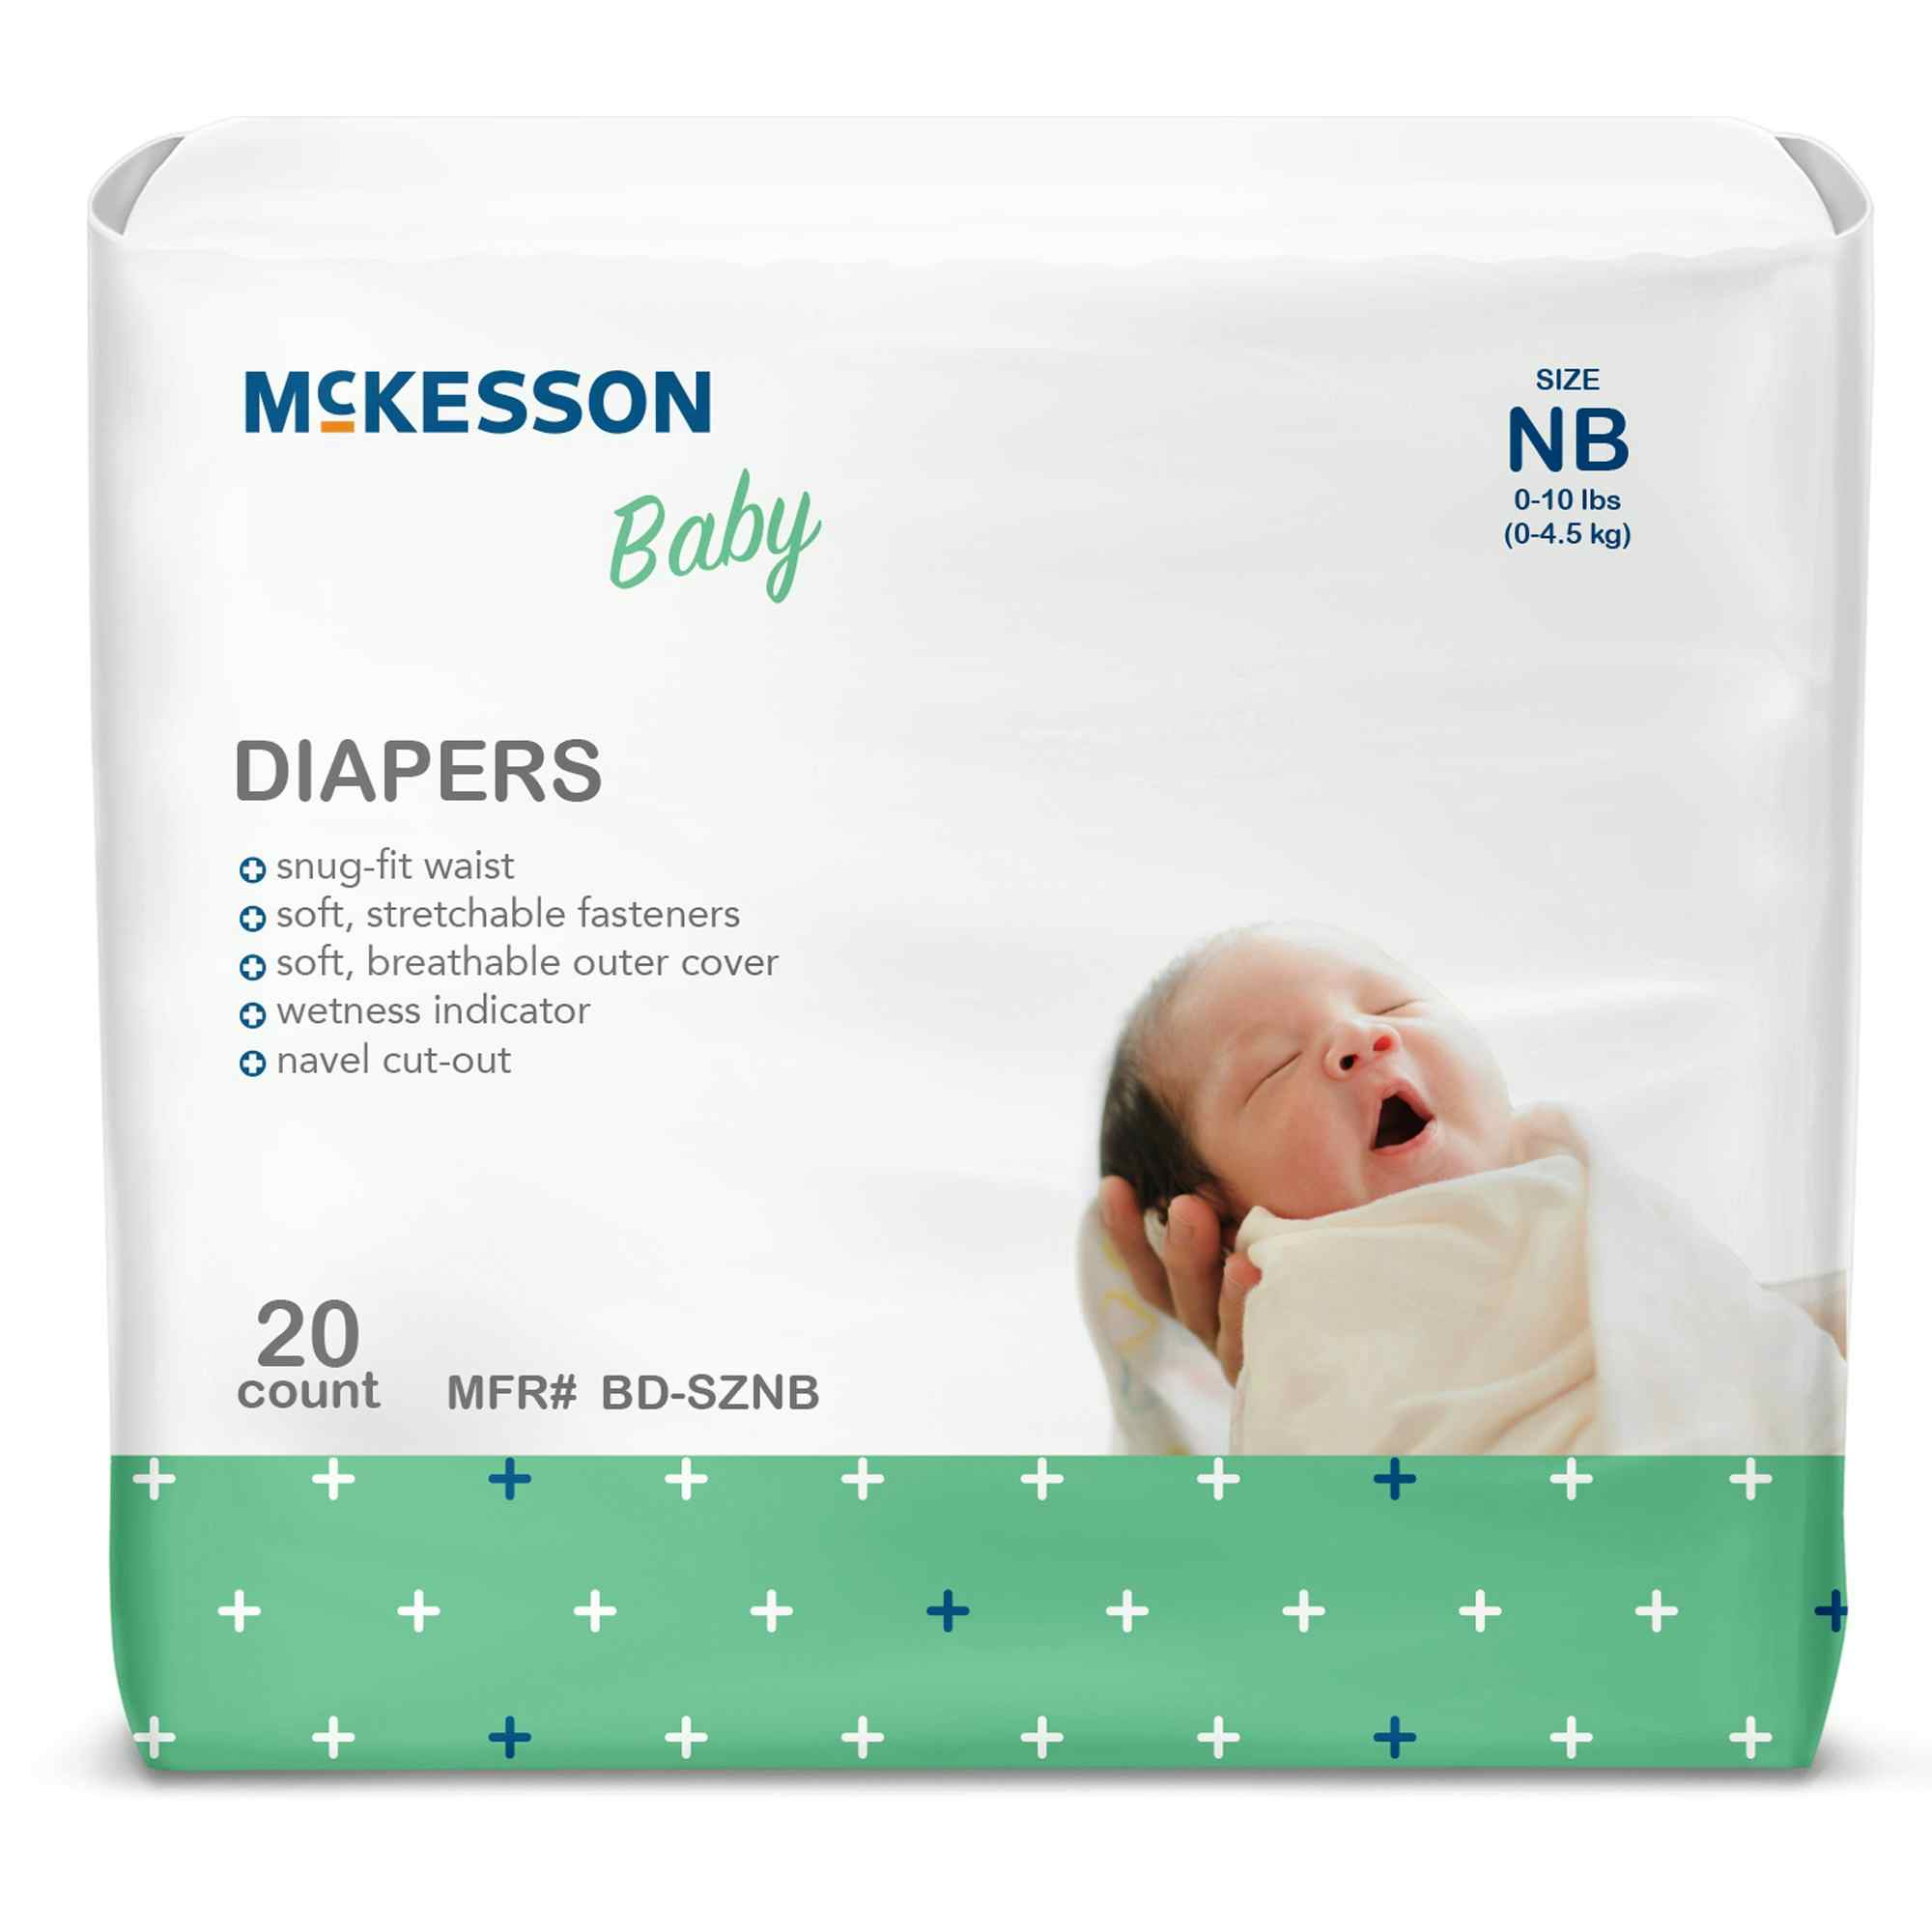 McKesson Disposable Unisex Baby Diaper with Tabs, Moderate, BD-SZNB, Newborn 0-10 lbs - Bag of 20